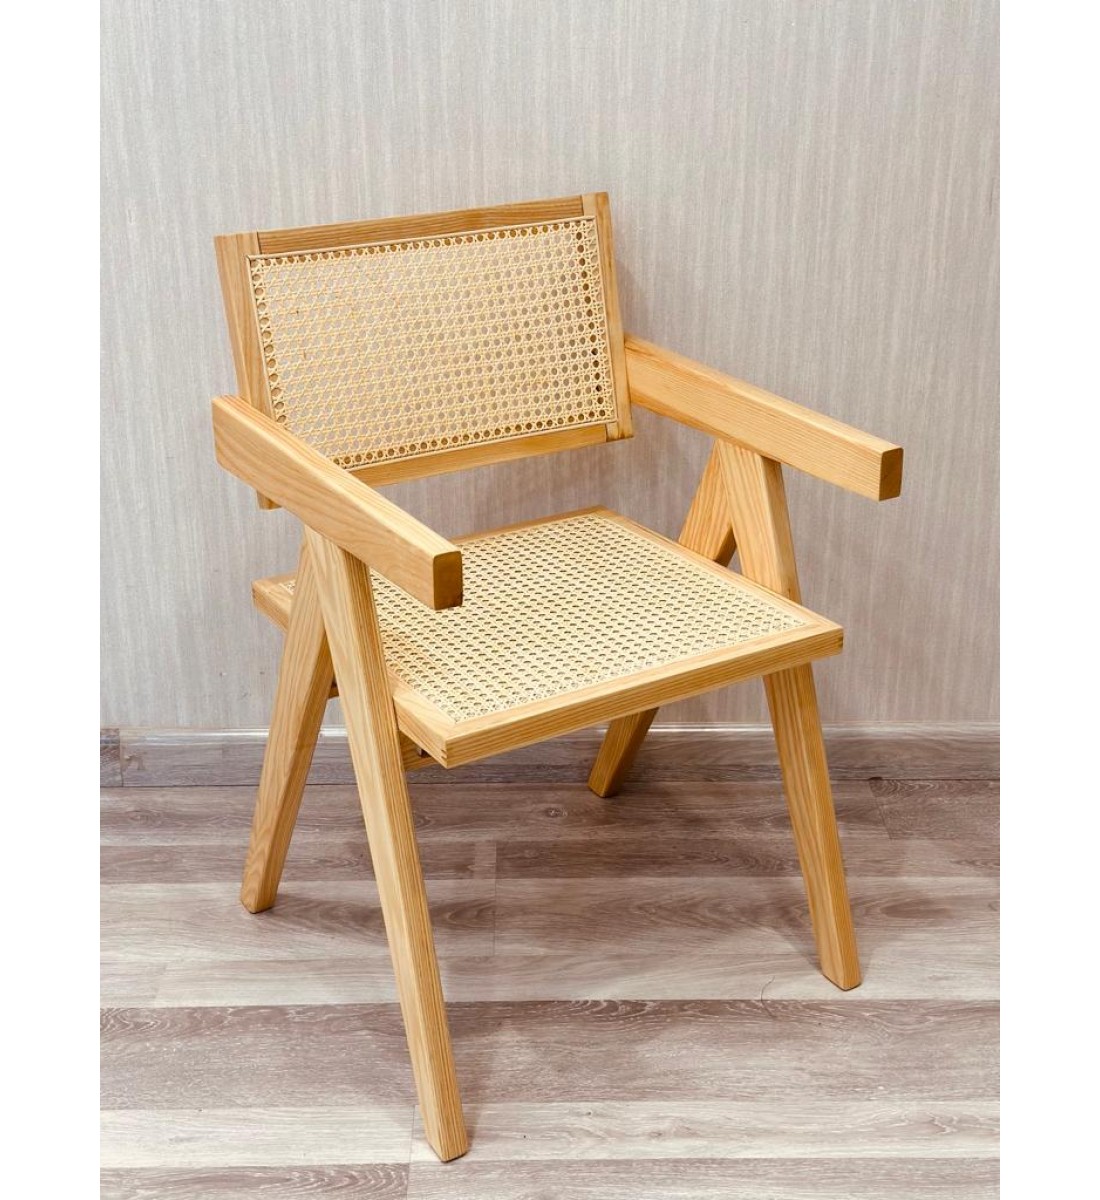 Classic rustic wooden chair in beige color - modern design